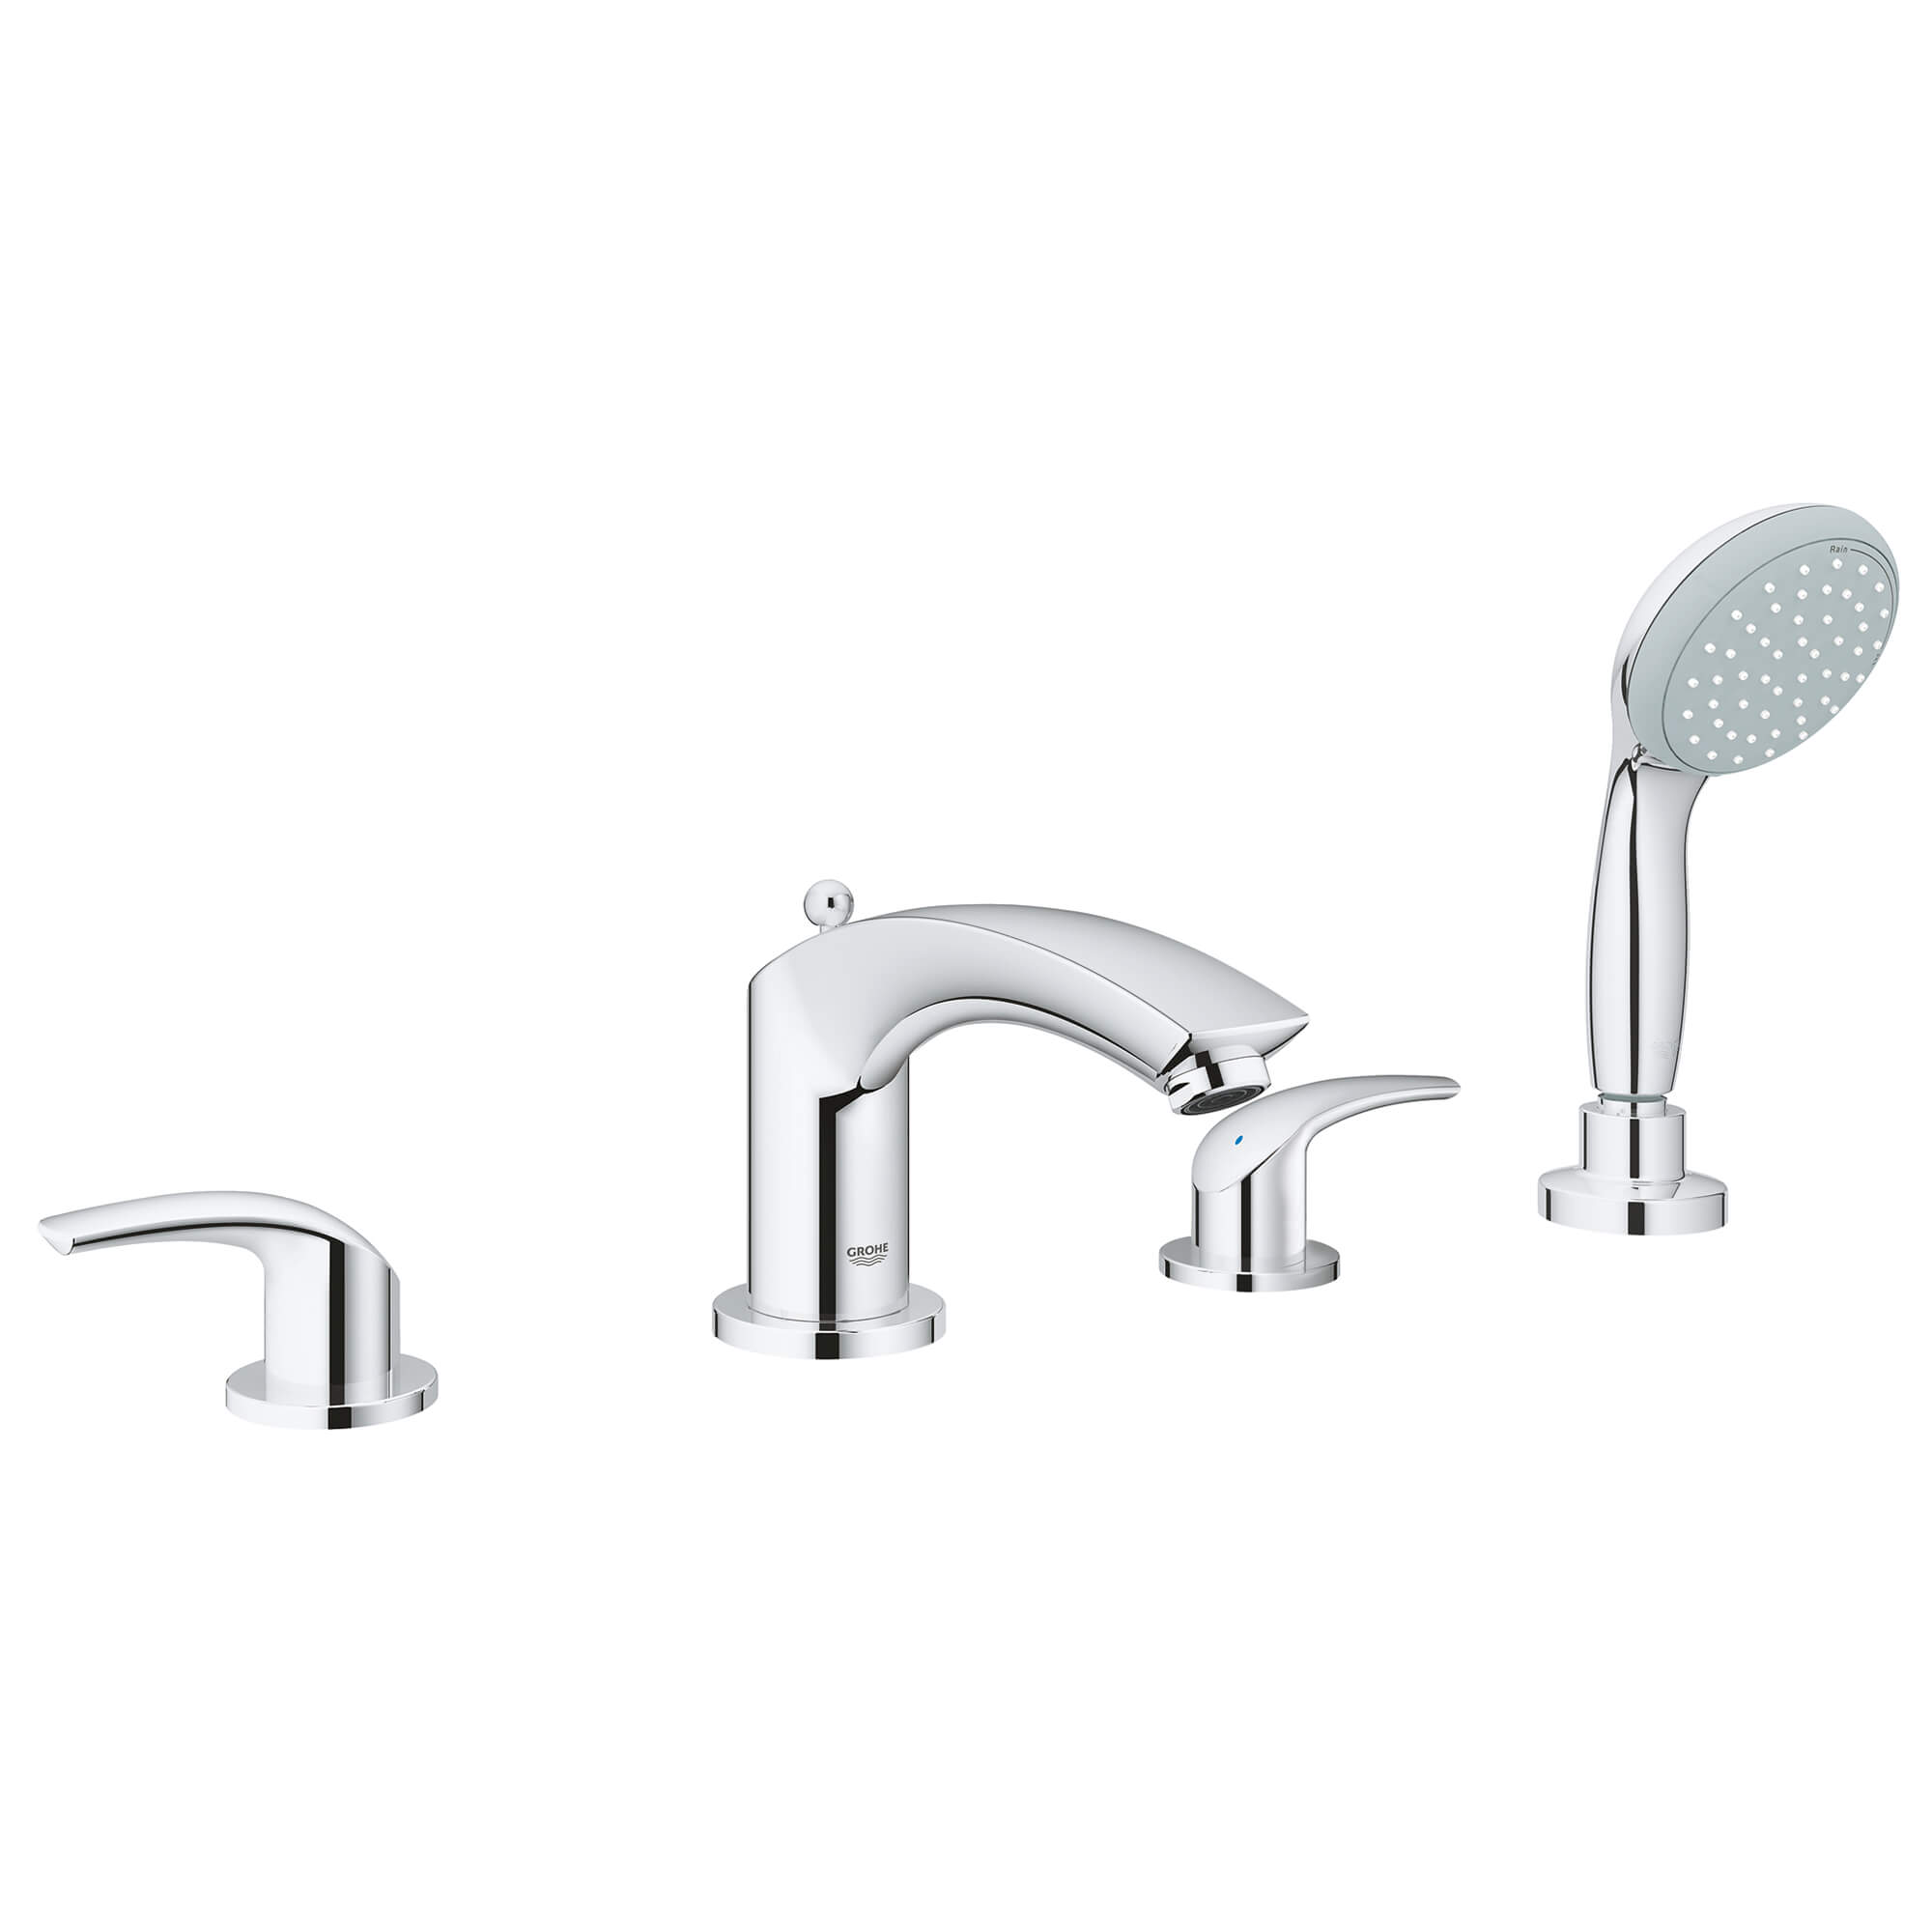 4-Hole 2-Handle Deck Mount Roman Tub Faucet with 1.75 GPM Hand Shower